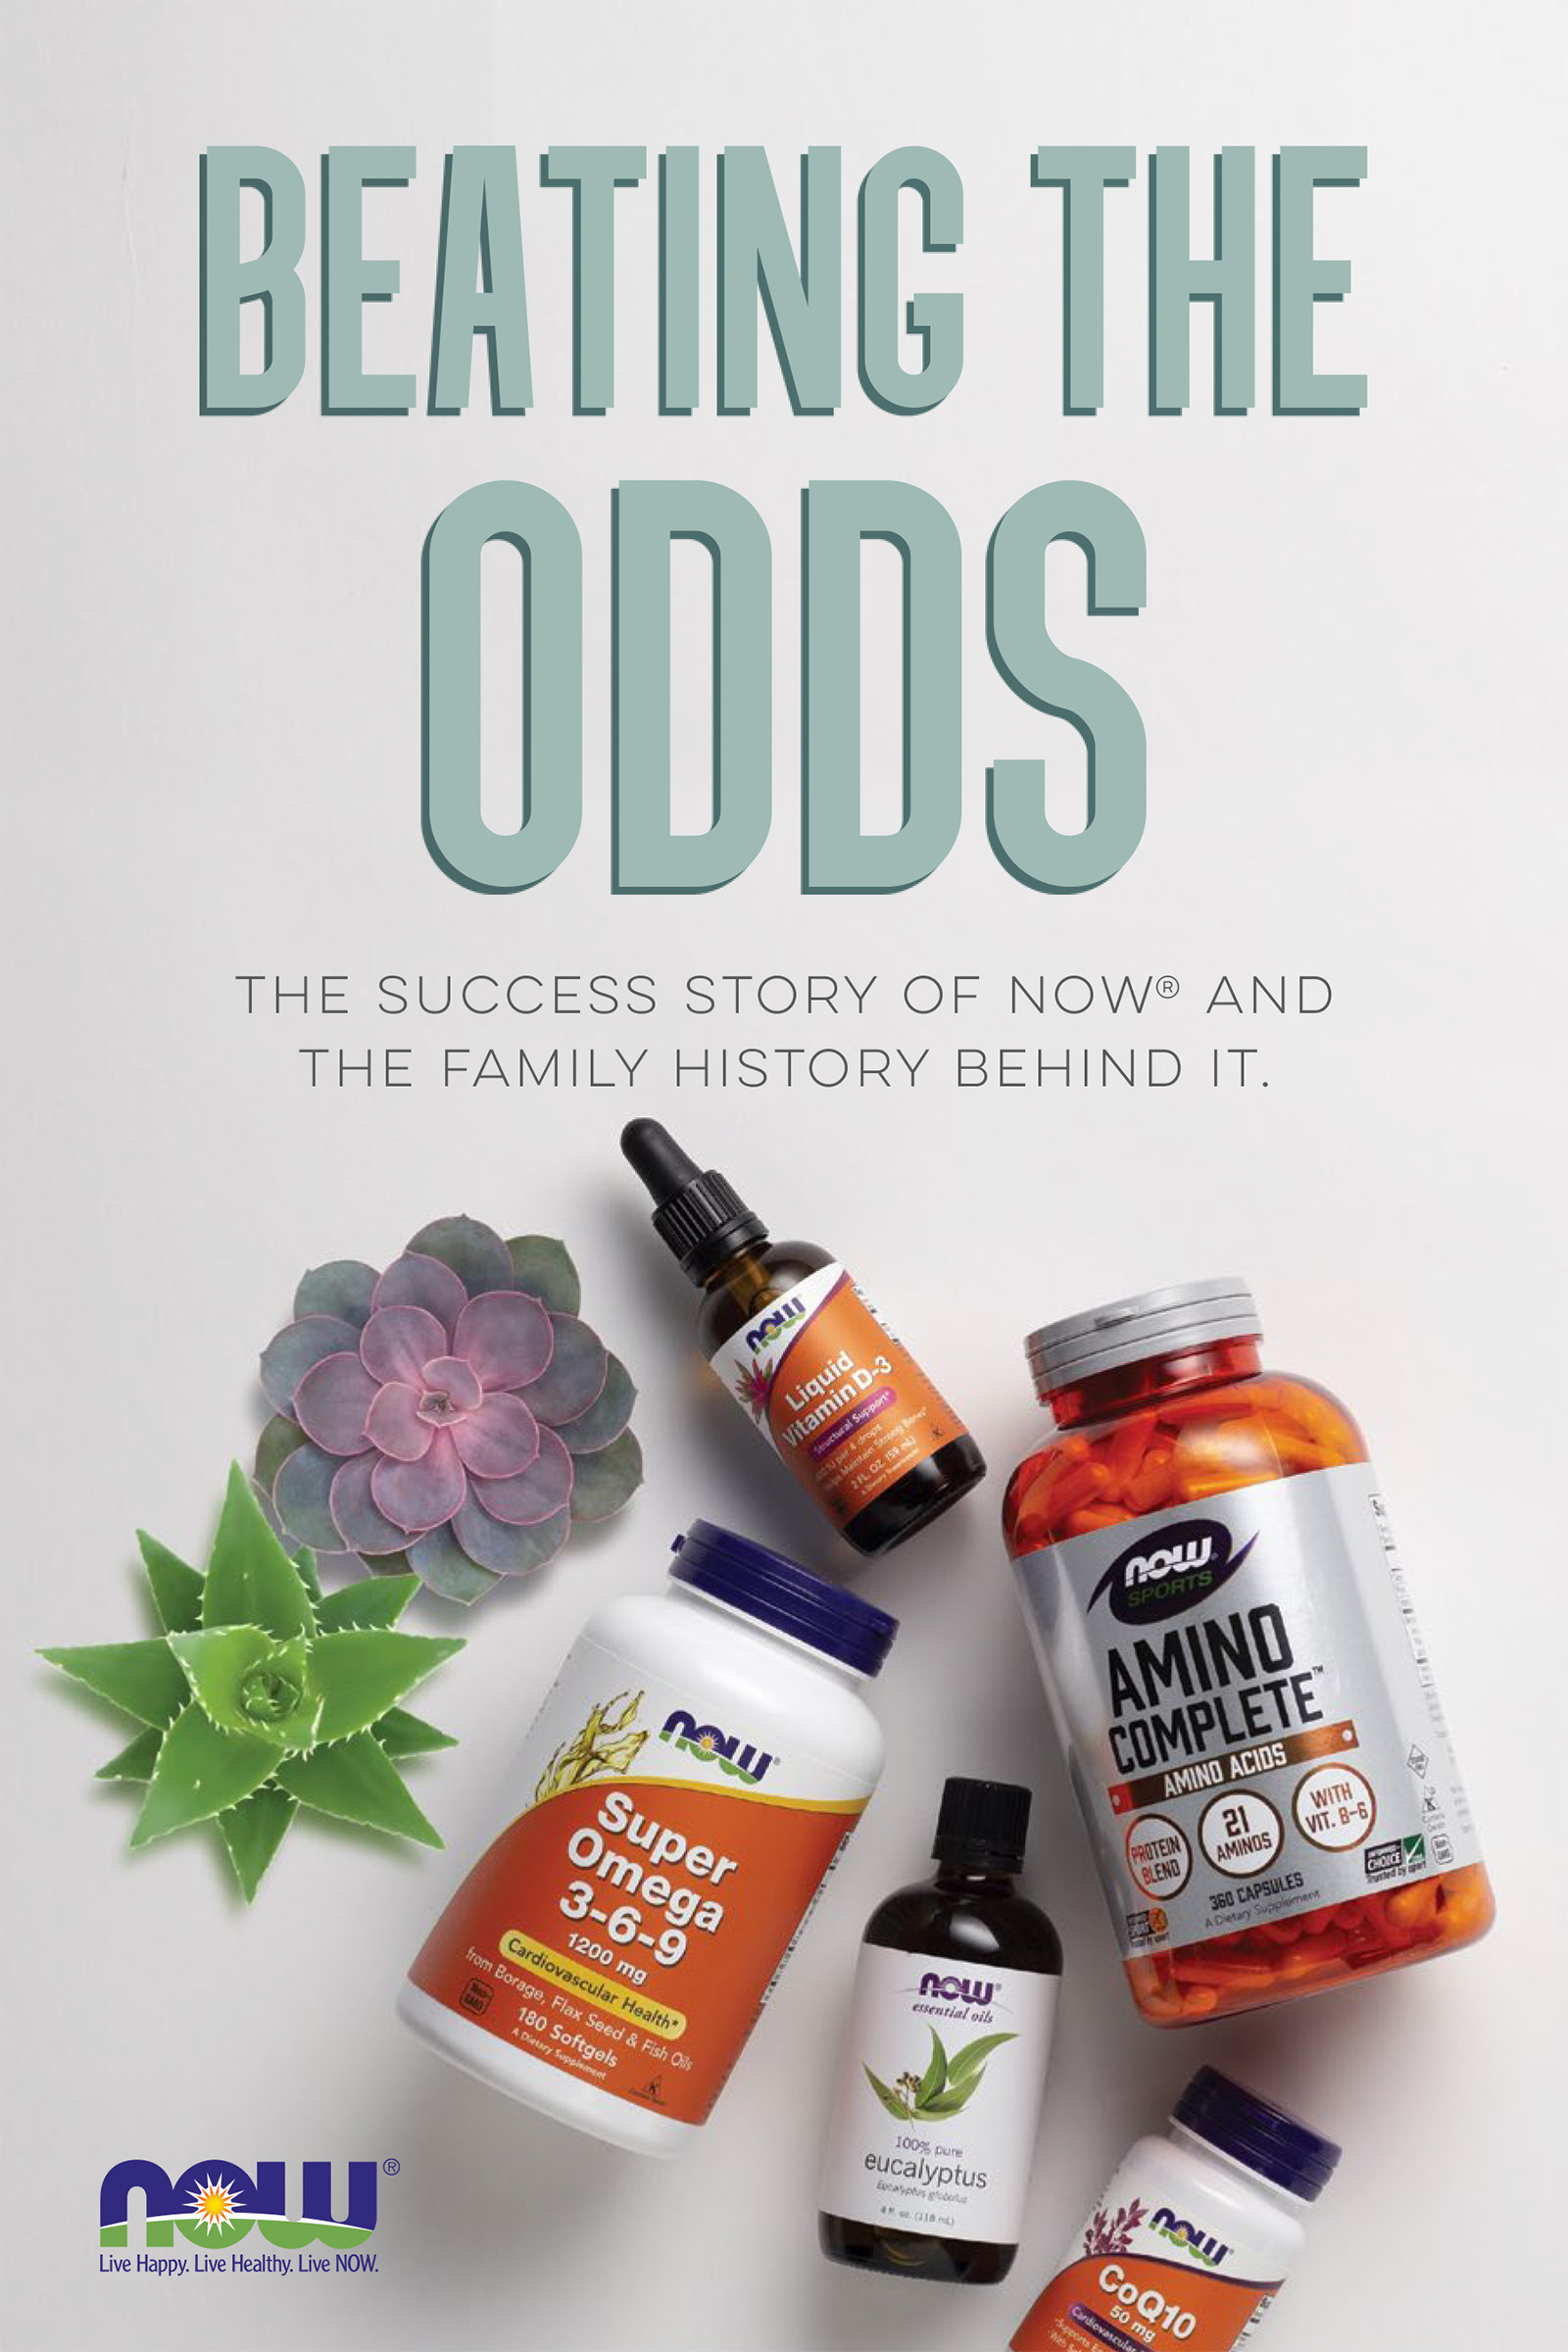 Beating the Odds is a book whose title is in moss green capital letters with a subtitle in small gray capital letters that reads The Success Story of NOW and the Family History Behind it. Five NOW brand products randomly laid on their sides below the title are Liquid Vitamin D-3, Amino Complete Capsules, Super Omega 3-6-9 Softgels, Eucalyptus Essential Oil and CoQ10 50 mg with a top view of two small succulent plants in which one is leaf green and the other has pink tones and looks like a flower.